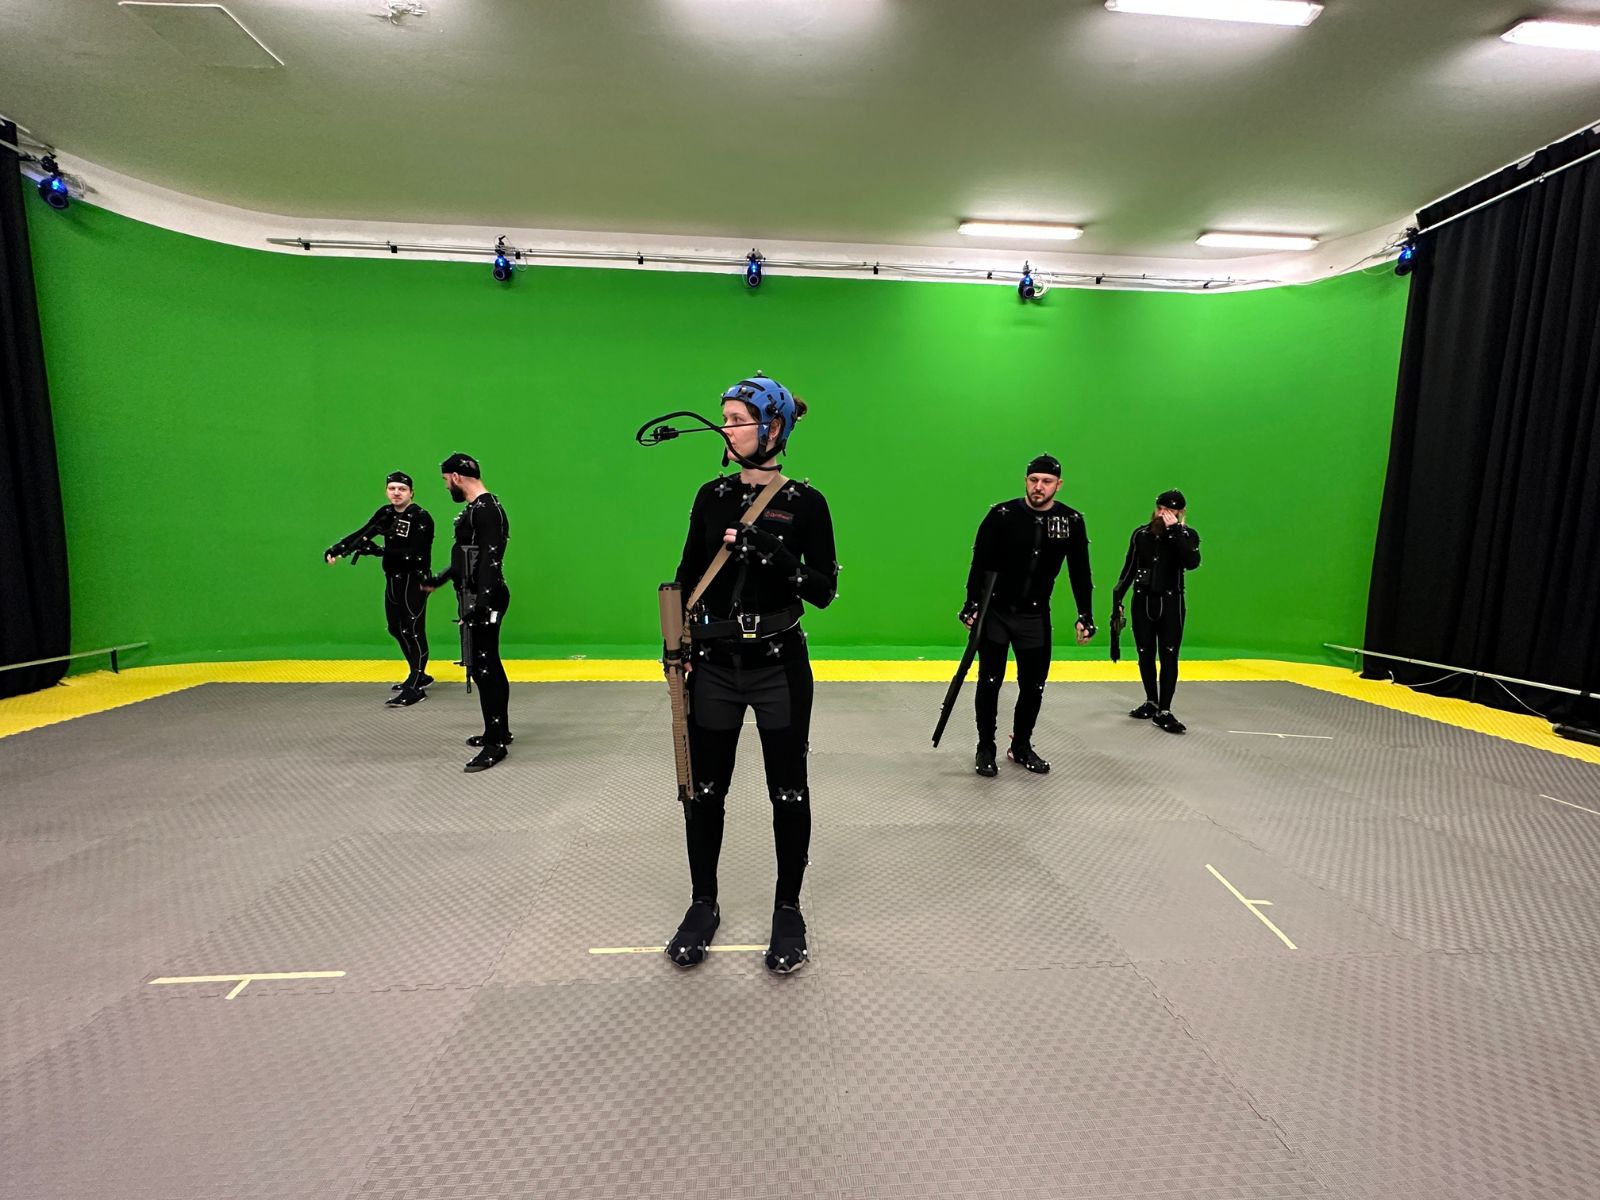 Vicon launches Valkyrie motion capture cameras - The Media